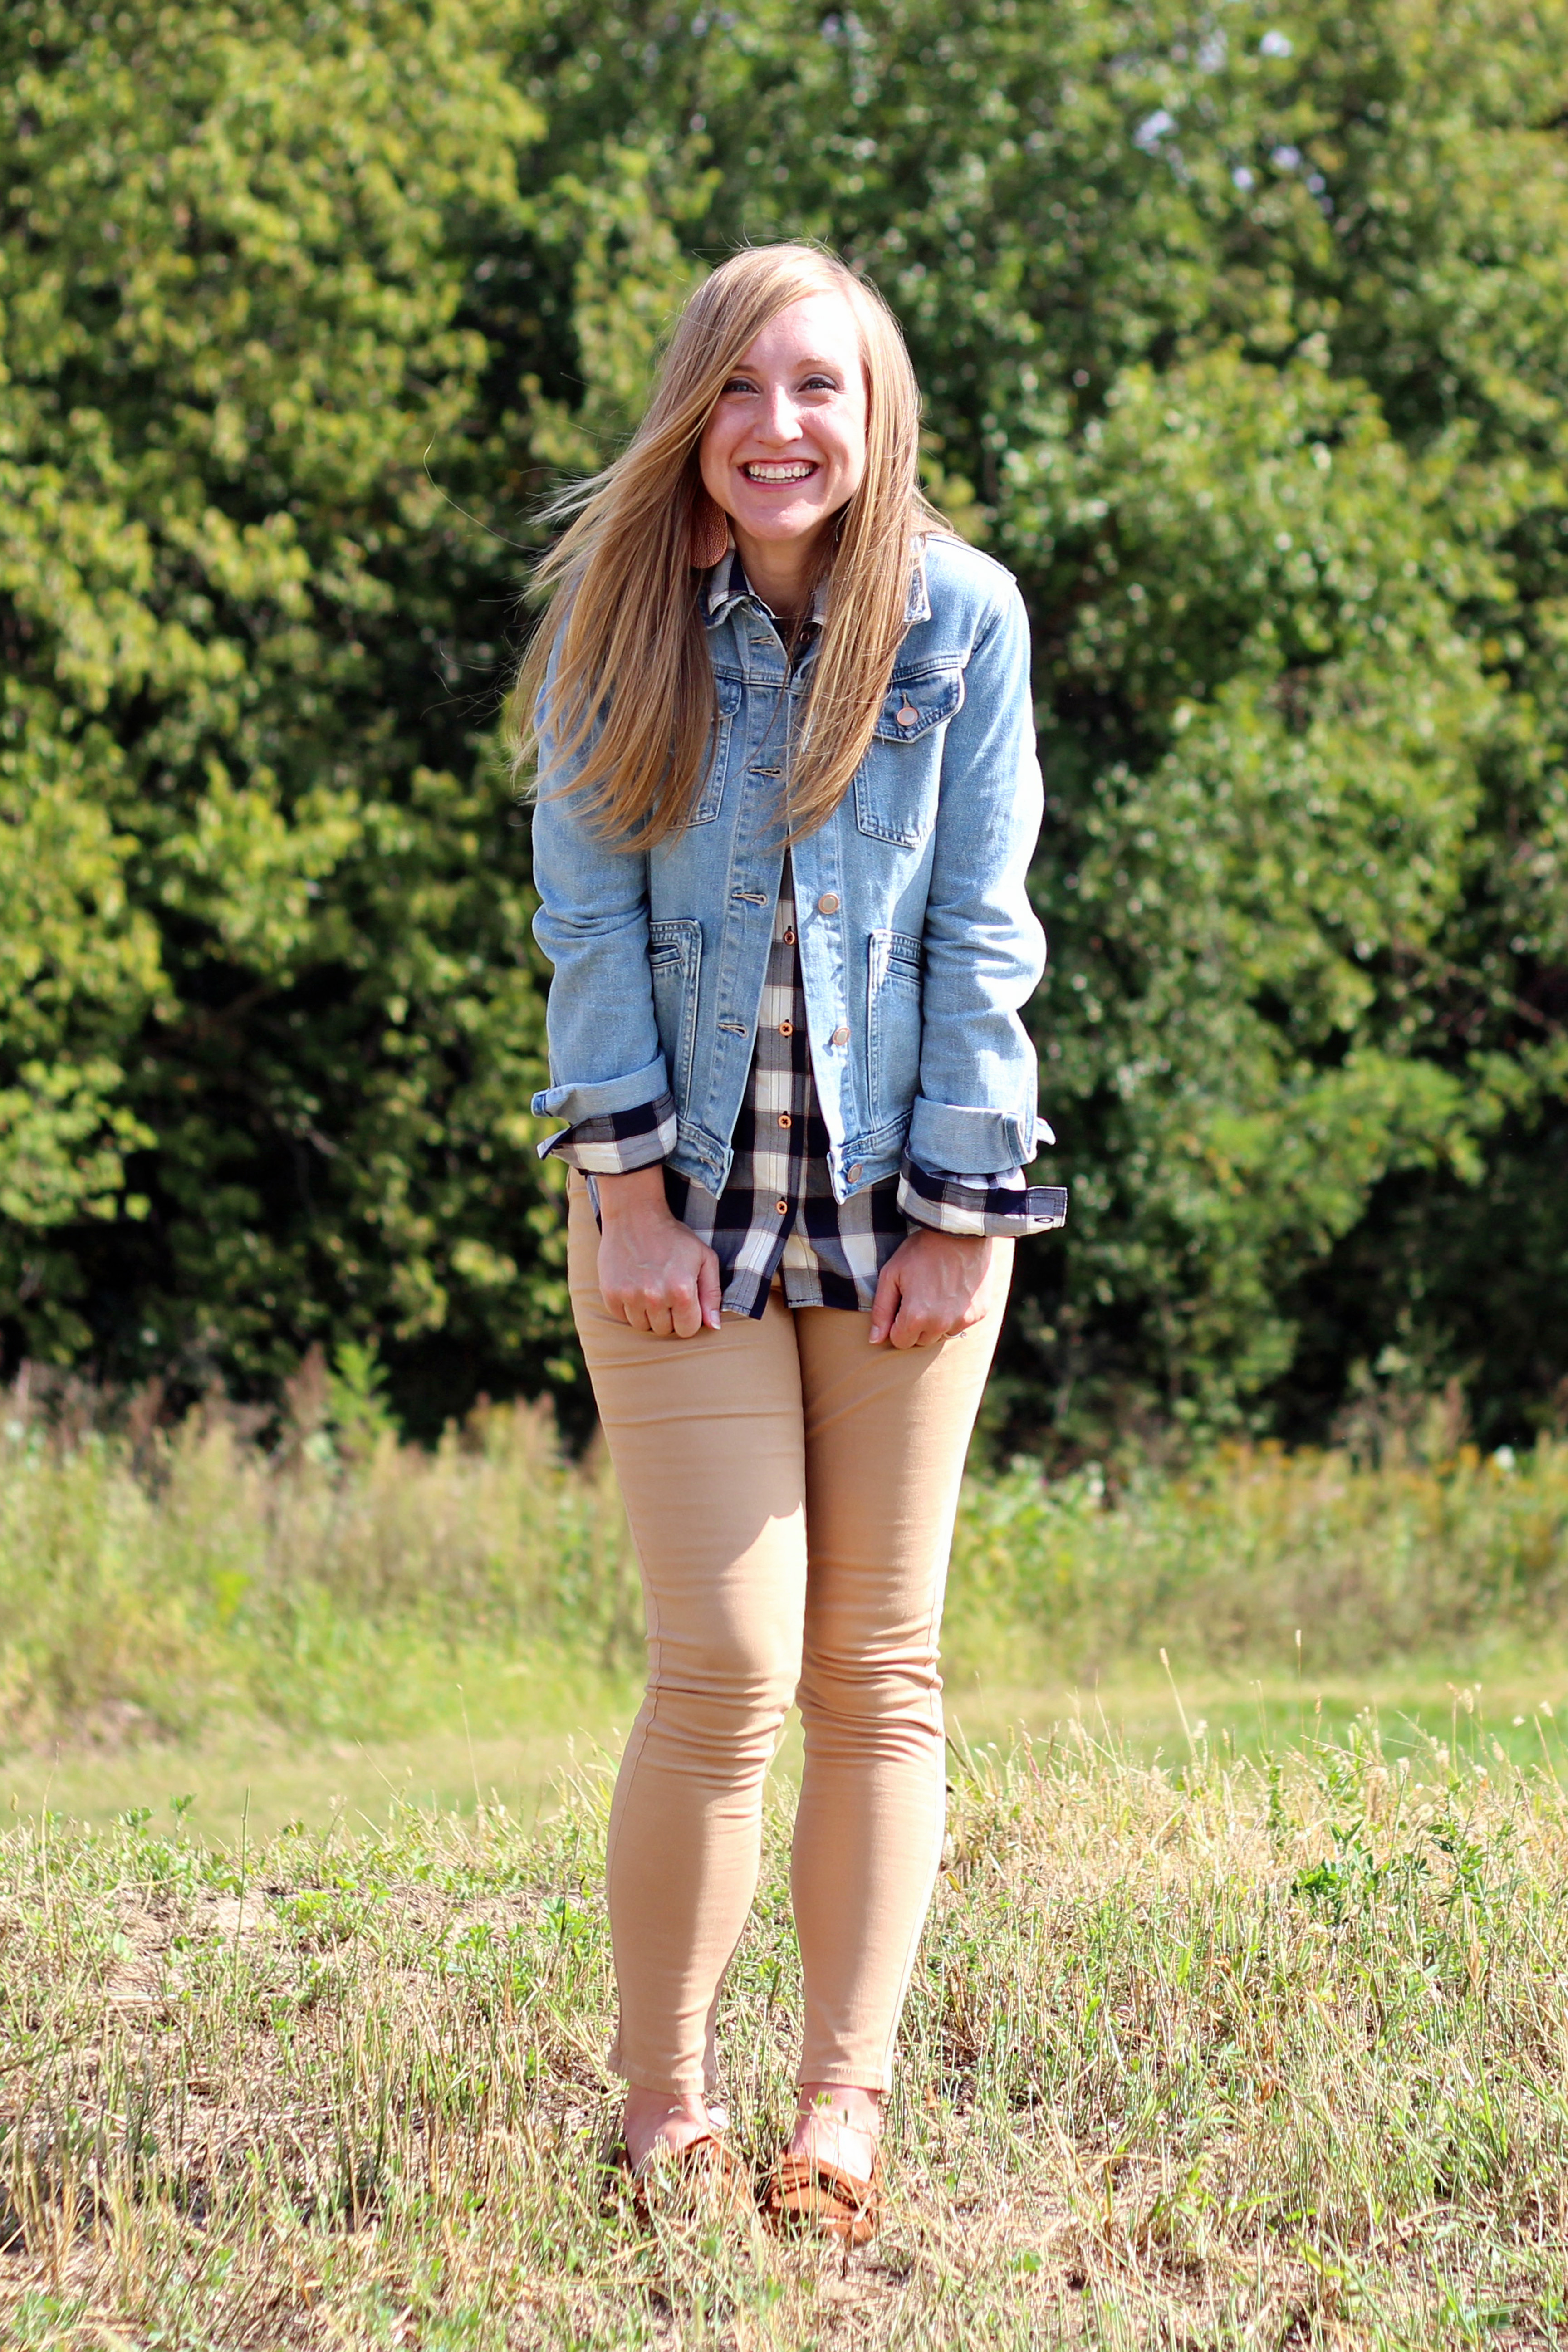 Fall Style from F & F Clothing at Hy-Vee!